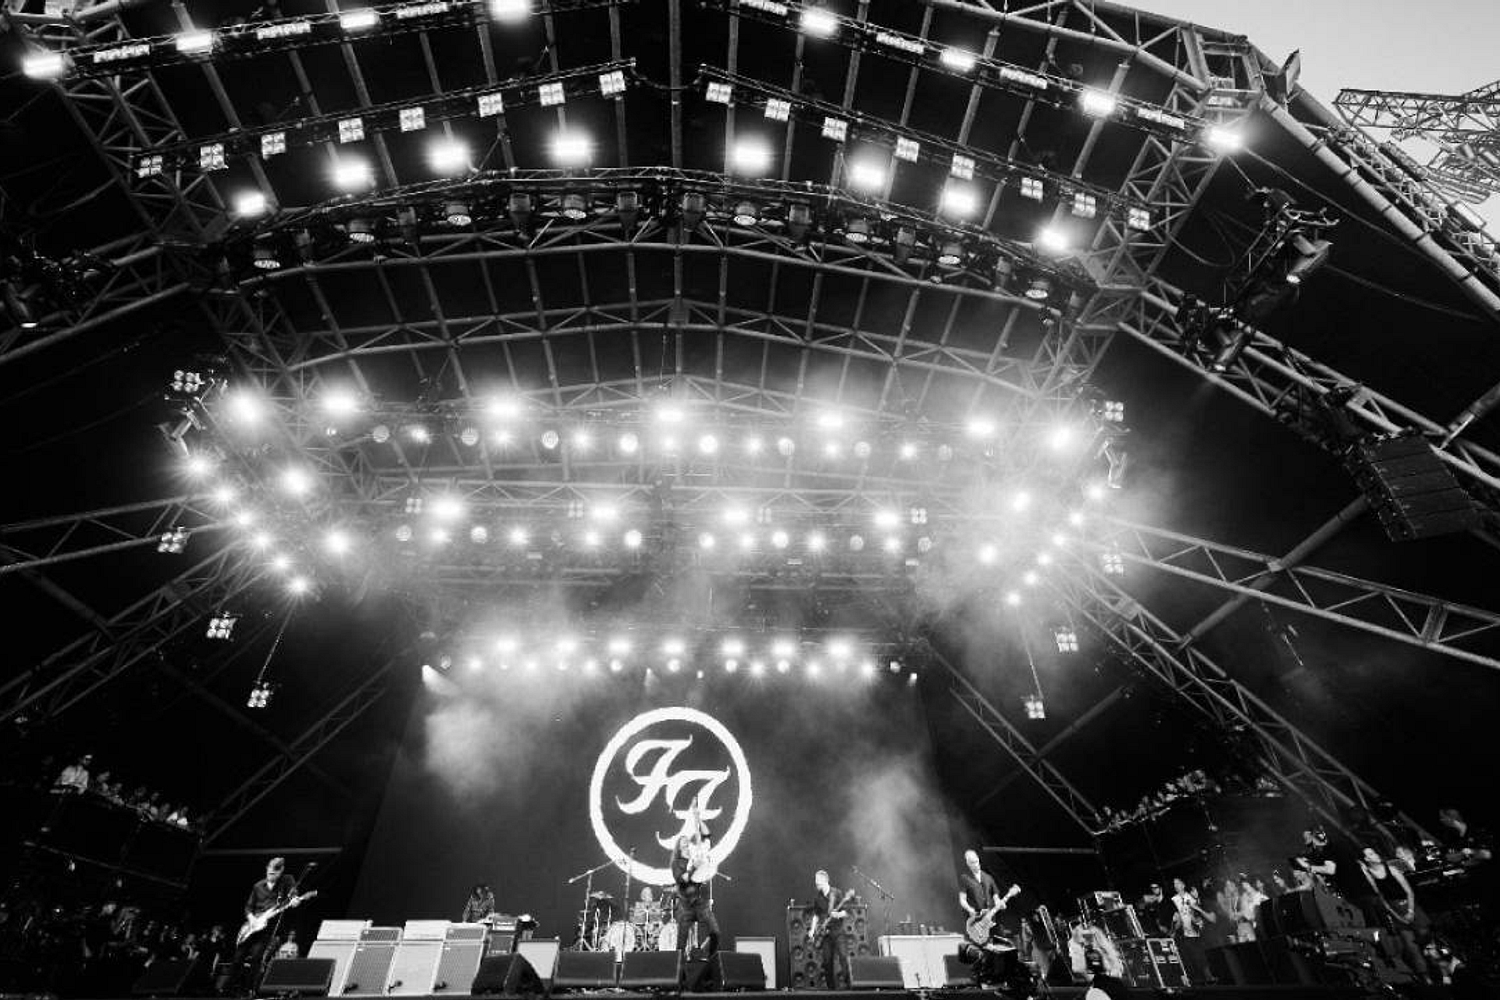 Foo Fighters share details of ‘Everything or Nothing At All’ UK tour